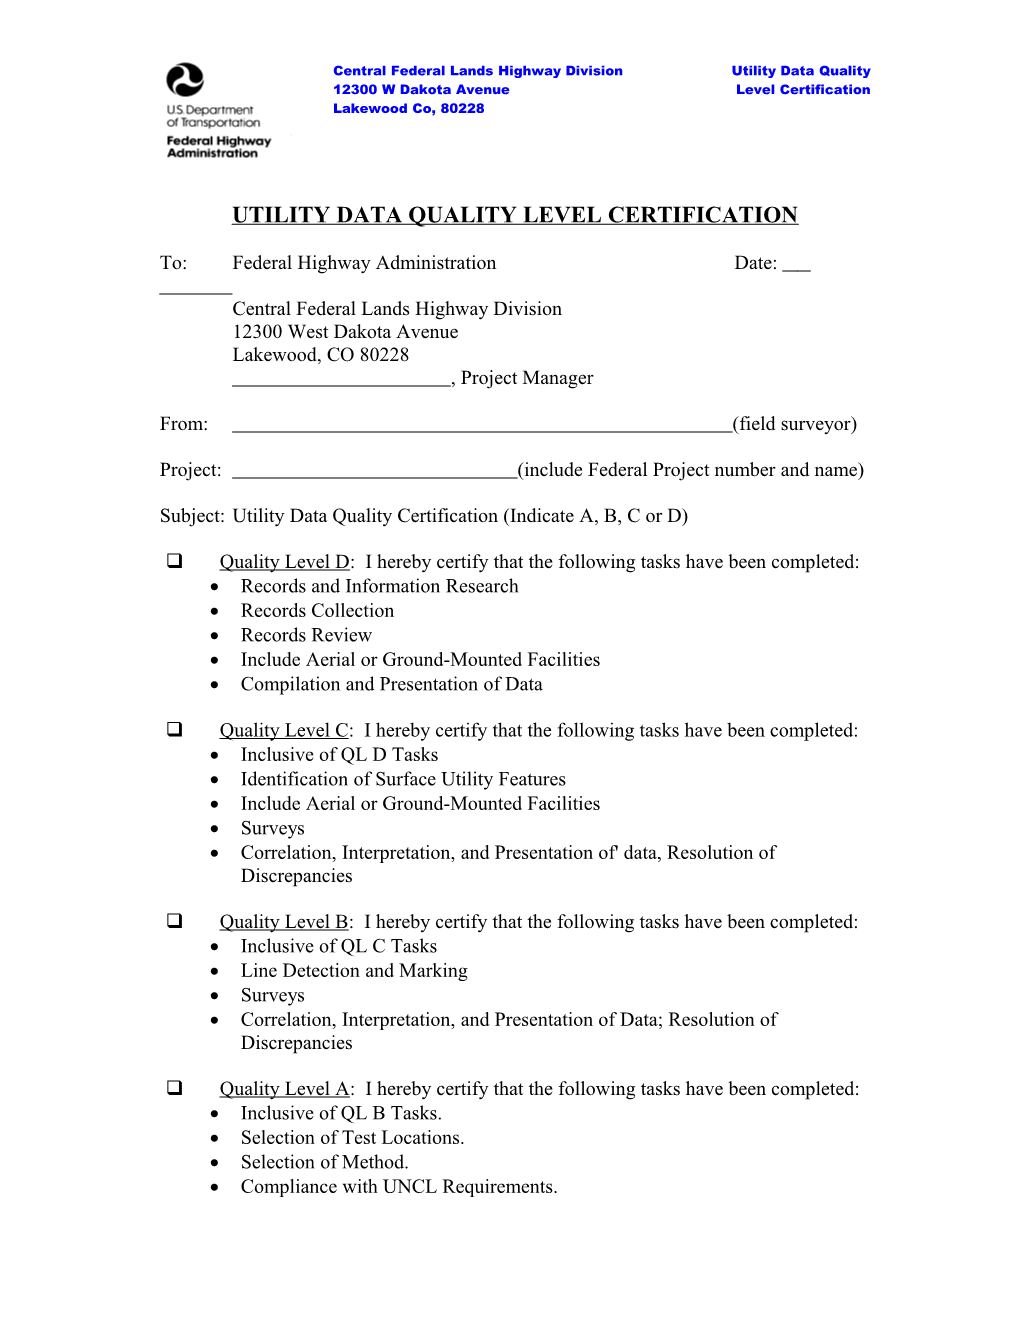 Utility Data Quality Level Certification